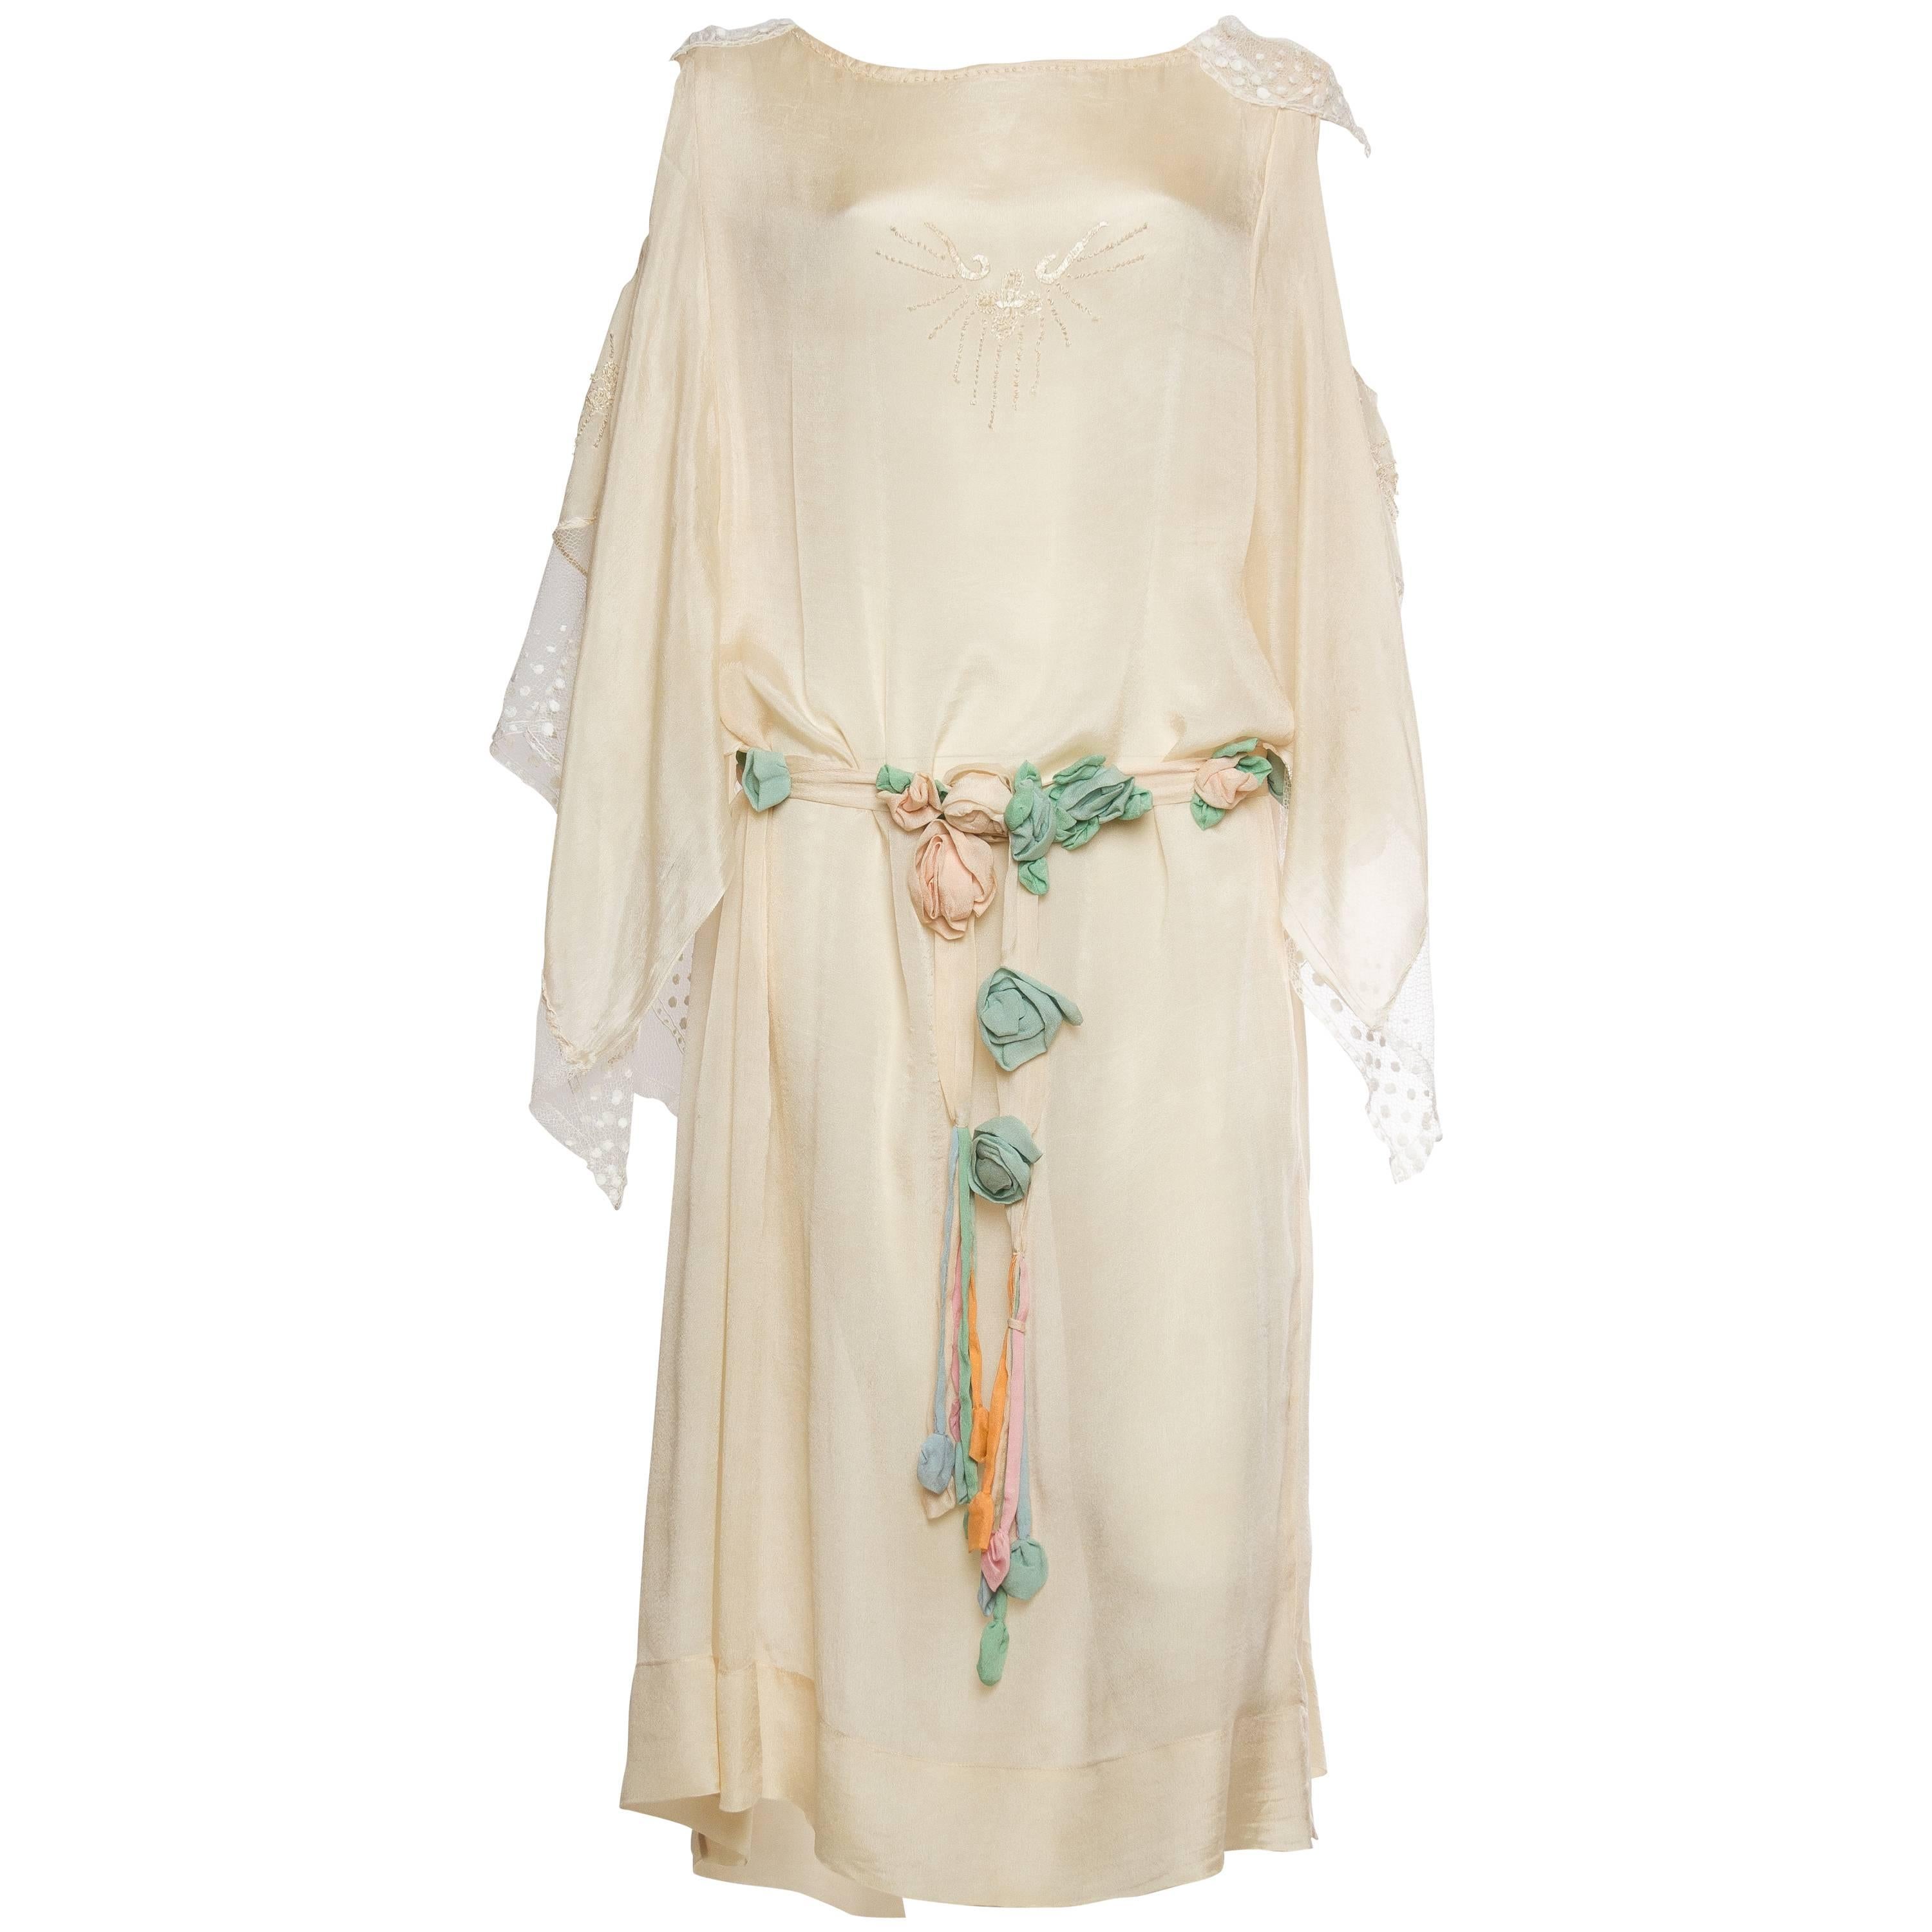 Early 1920s Kimono Sleeve Silk Dress with Roses and Lace